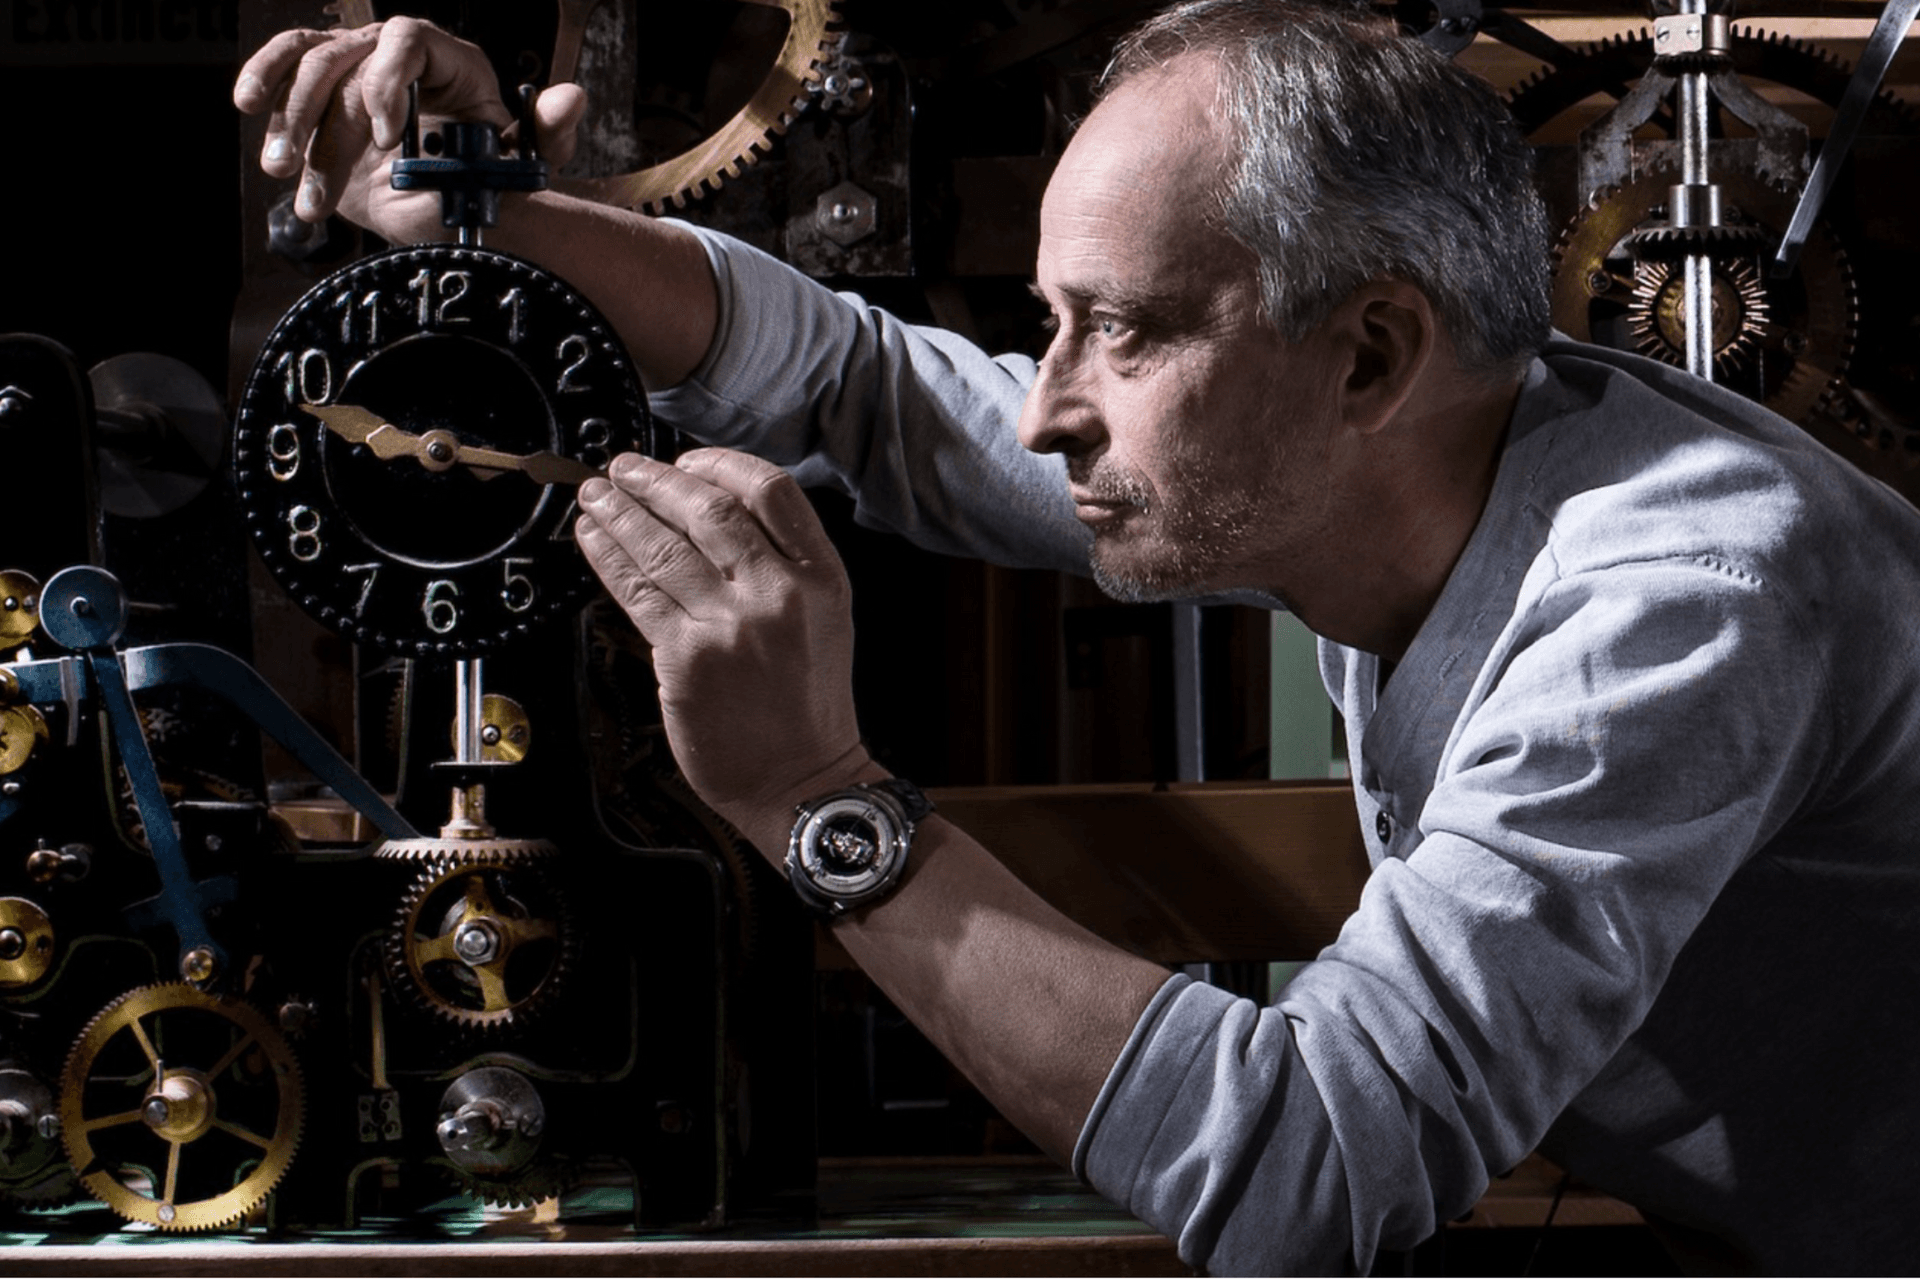 In 1998, Vianney Halter launched his own brand, which took watchmaking on a Jules-Verne-inspired trip through time and space Photo: The Limited Edition UK